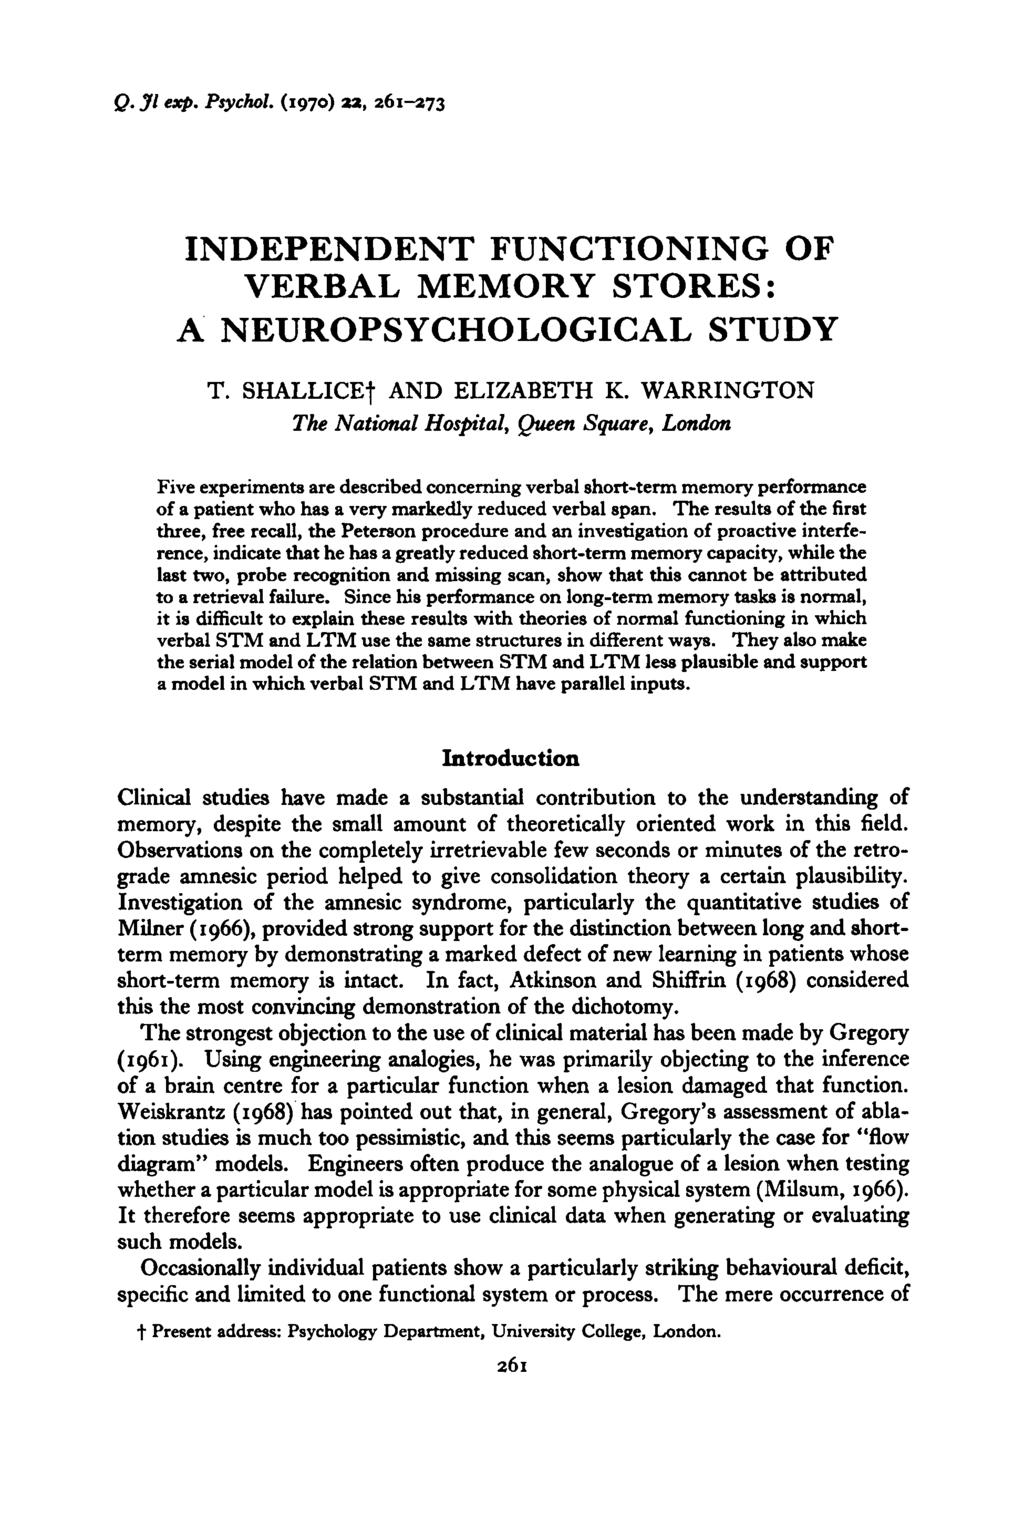 Q. J1 Rxp. Psychol. (1970) 22, 261-273 INDEPENDENT FUNCTIONING OF VERBAL MEMORY STORES : A NEUROPSYCHOLOGICAL STUDY T. SHALLICE? AND ELIZABETH K.